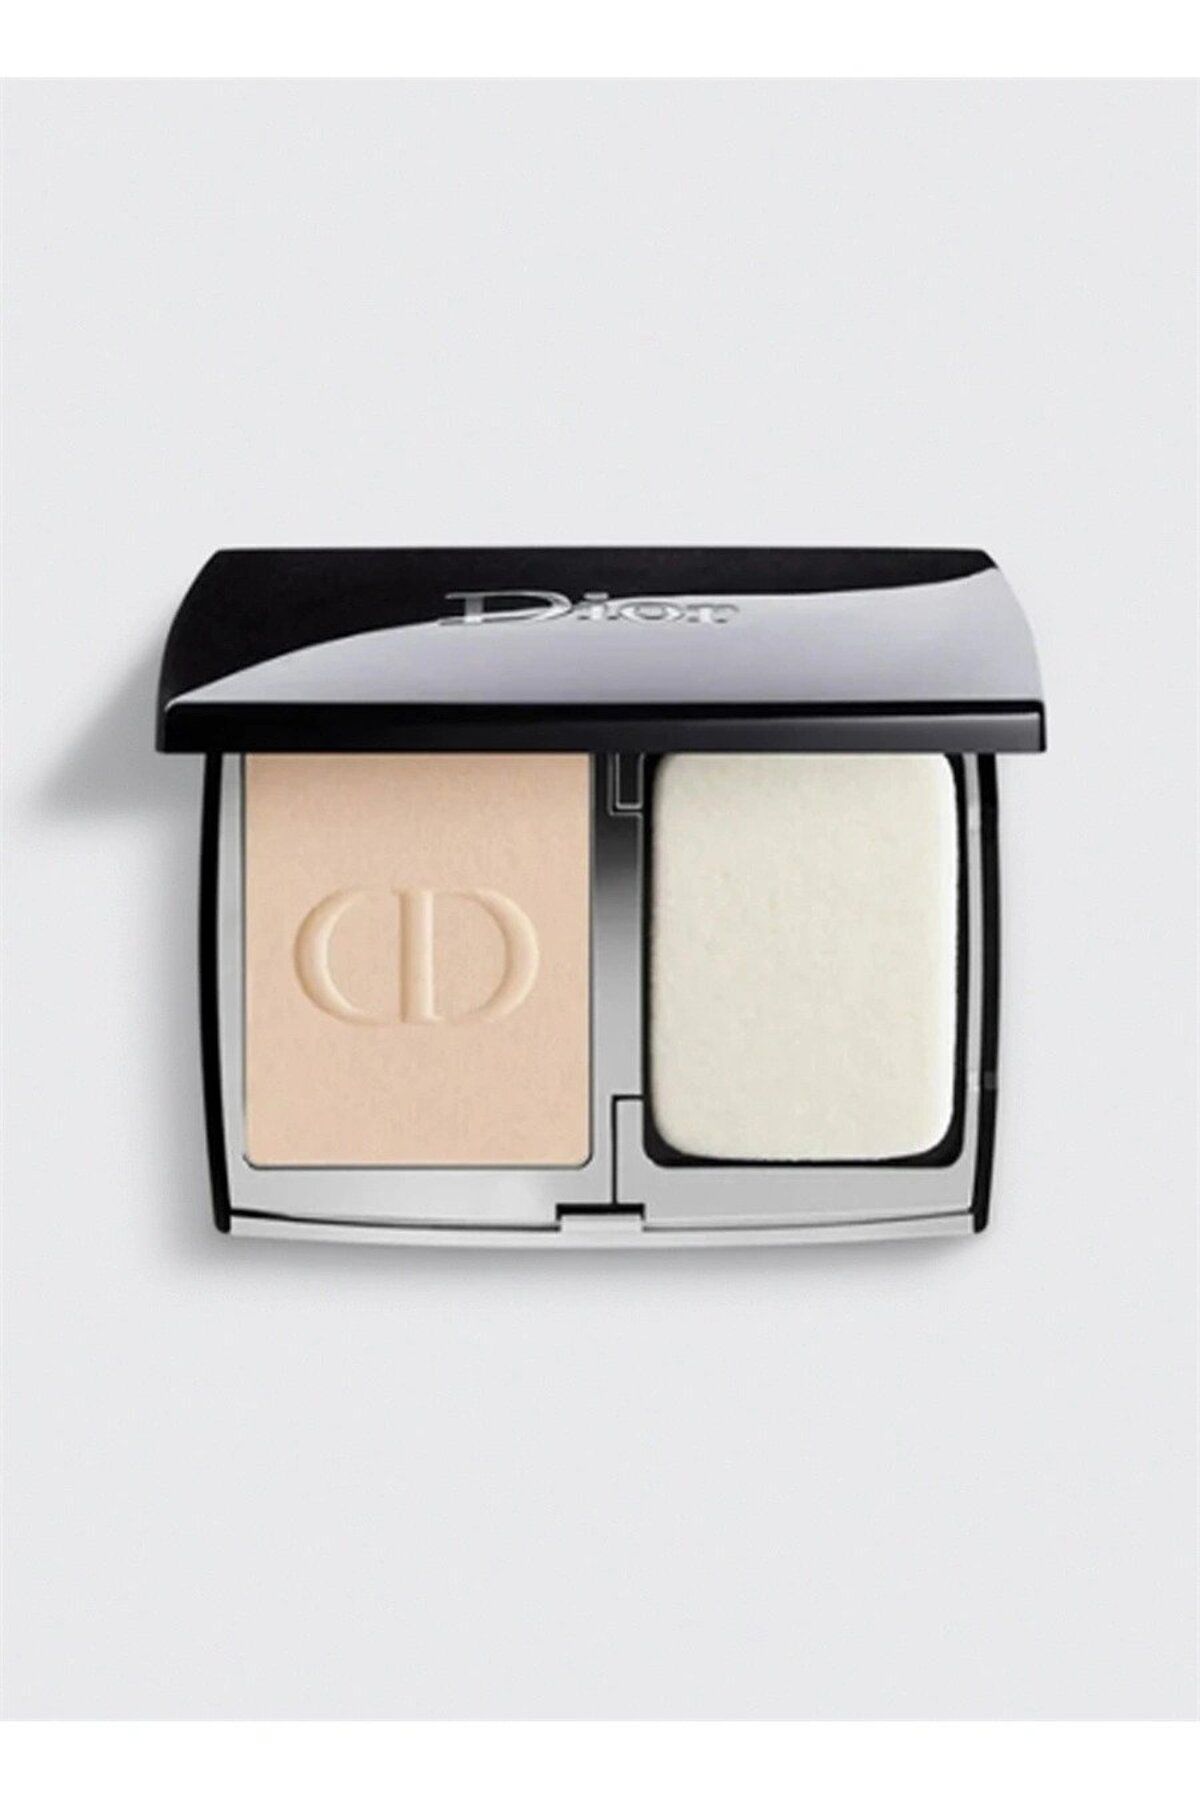 Dior - Pudra - Forever Natural Velvet Compact Foundation 1N